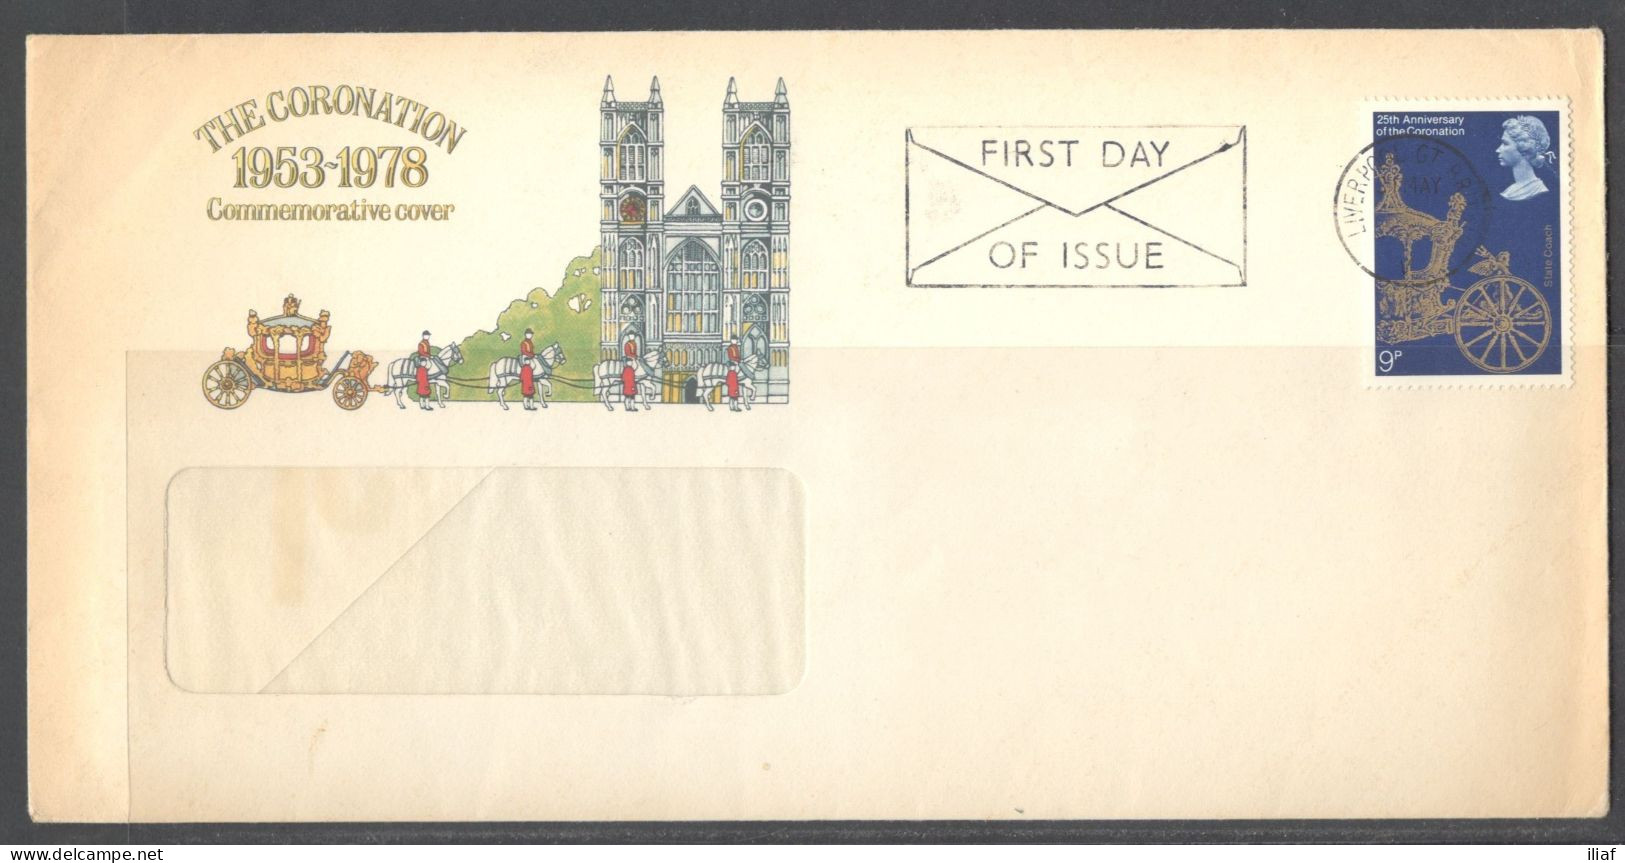 United Kingdom Of Great Britain. FDC Sc. 835.  25th Anniversary Of Coronation.  FDC Cancellation On FDC Envelope - 1971-1980 Em. Décimales